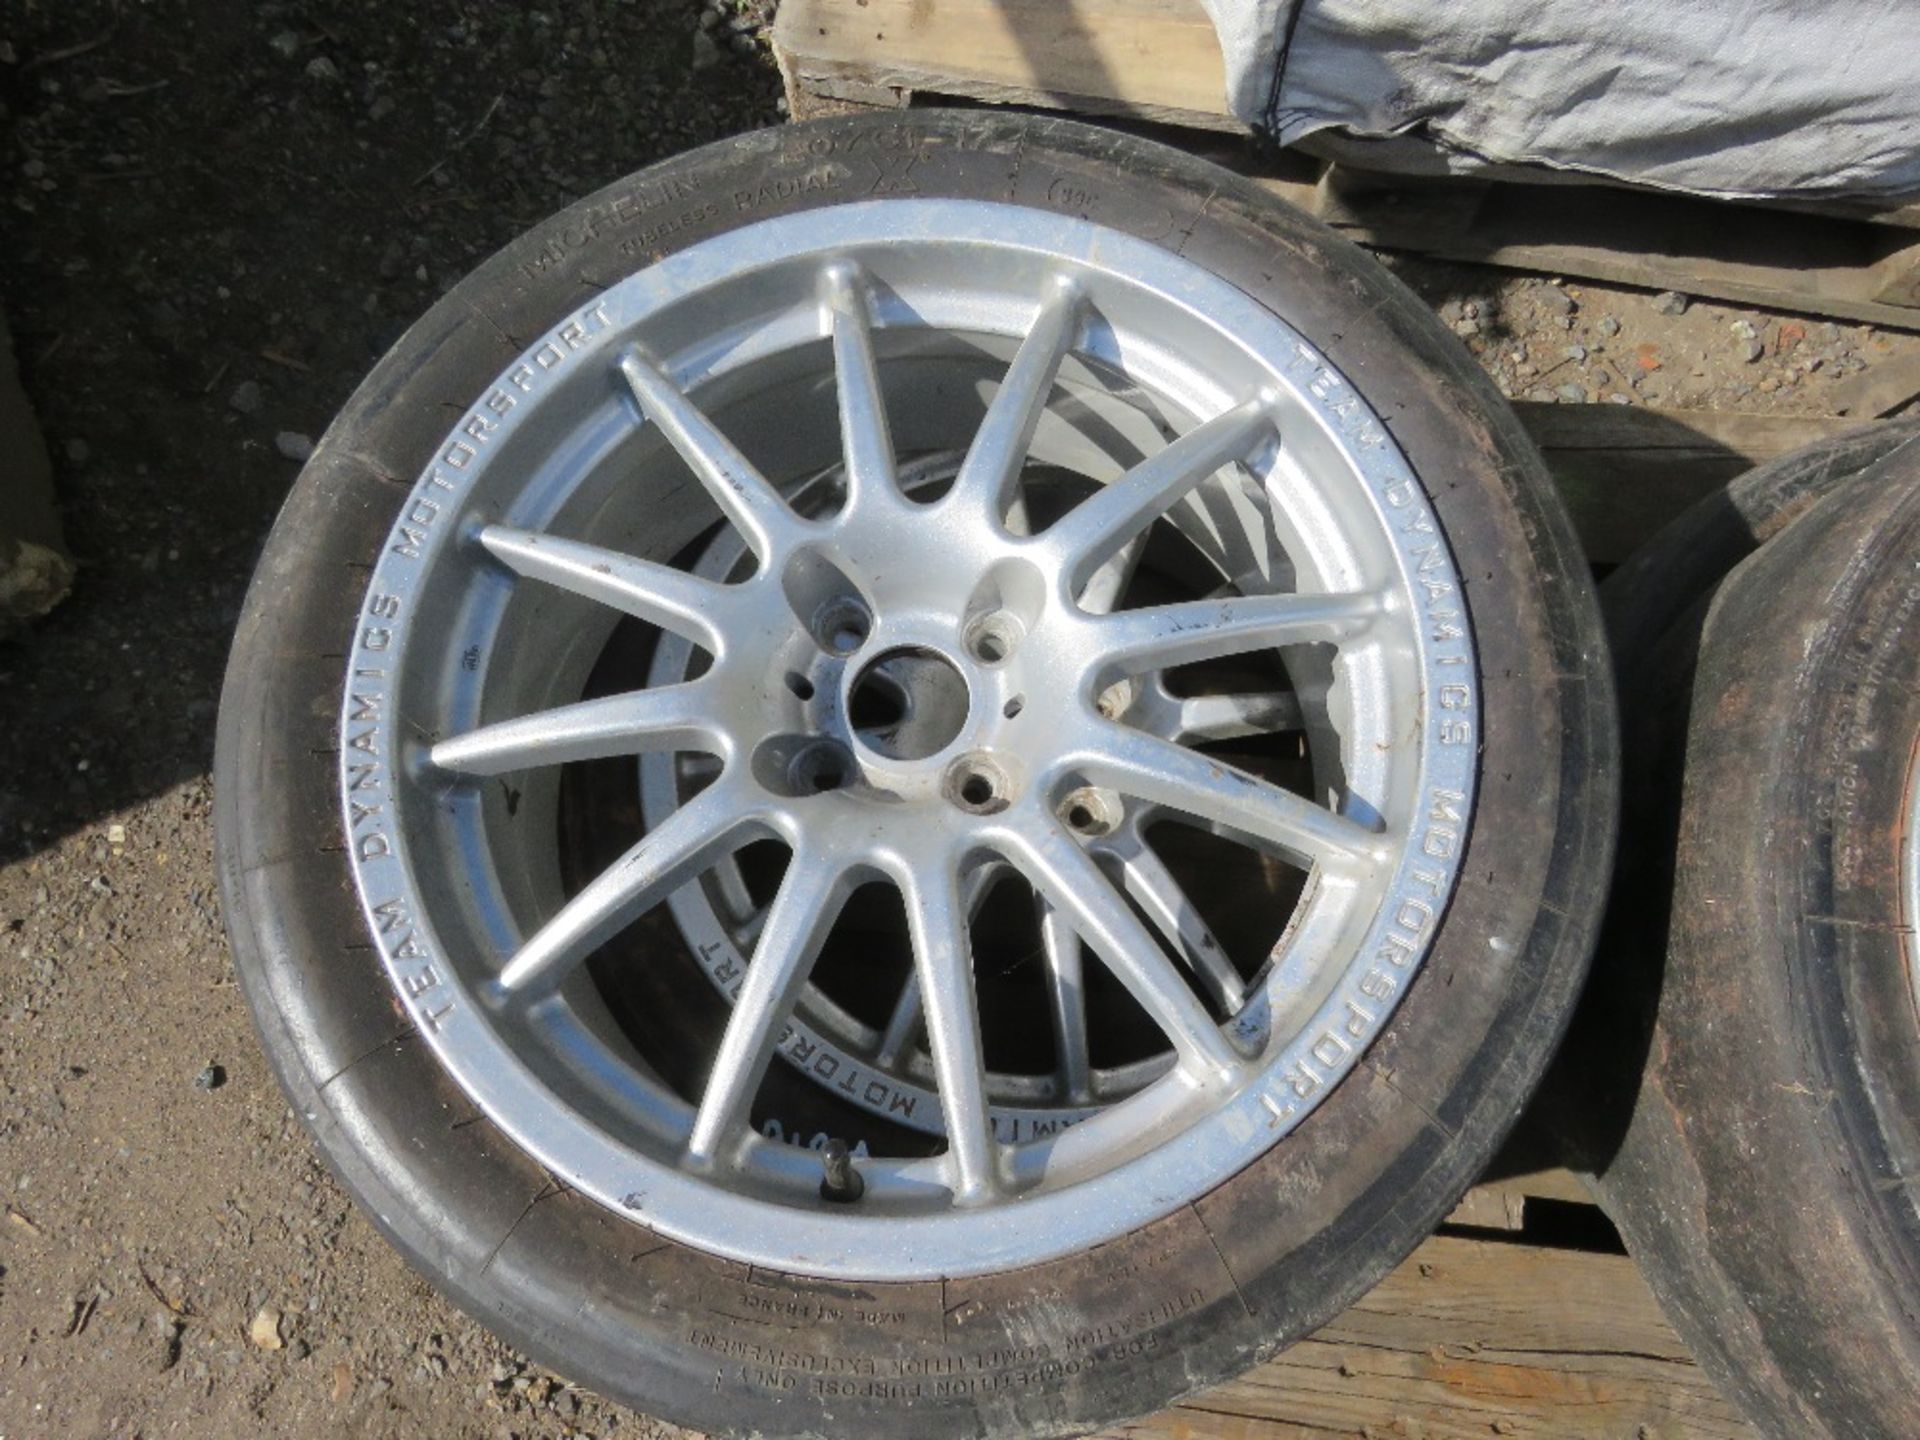 SET OF 4NO TEAM DYNAMICS MOTORSPORT RACING WHEELS AND TYRES, PREVIOUSLY USED ON AN ALFA ROMEO 33 RA - Image 4 of 8